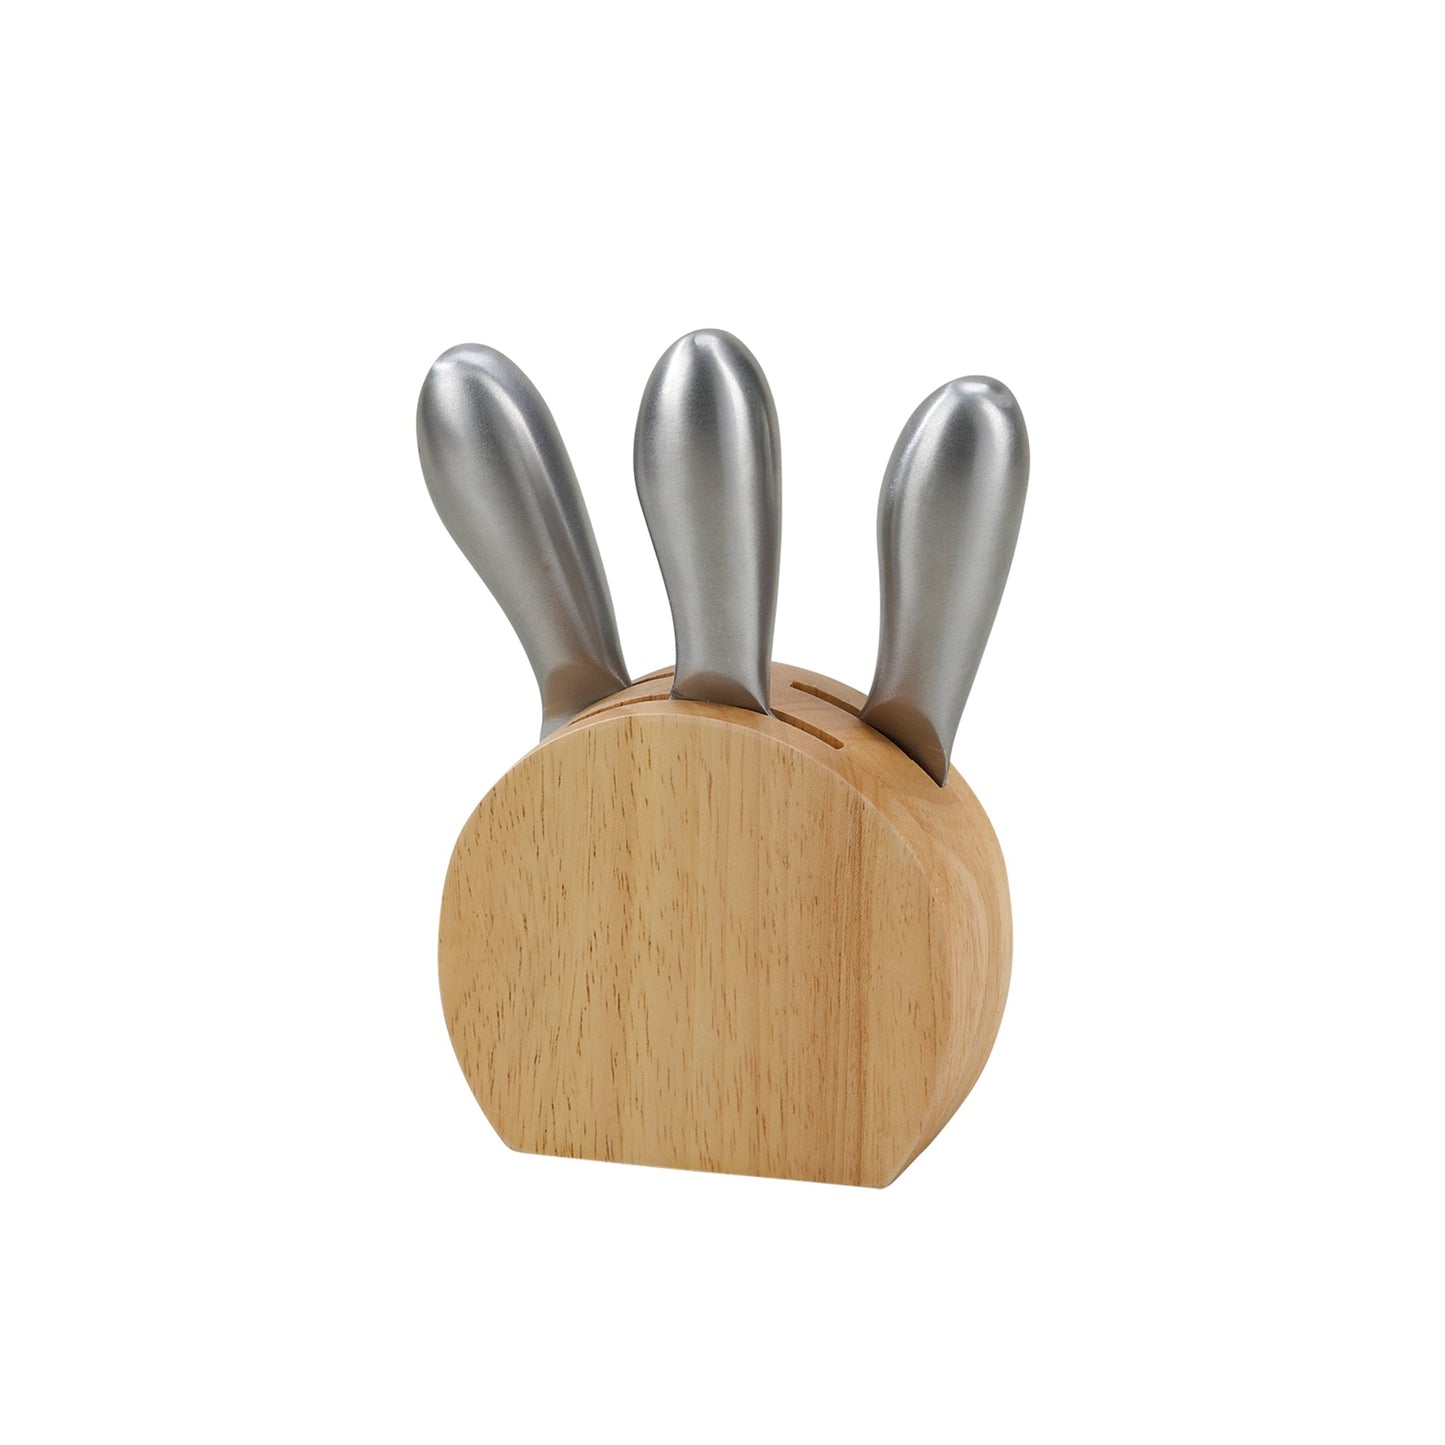 Wood Block with 3 Stainless Steel Cheese Utensils by Creative Gifts